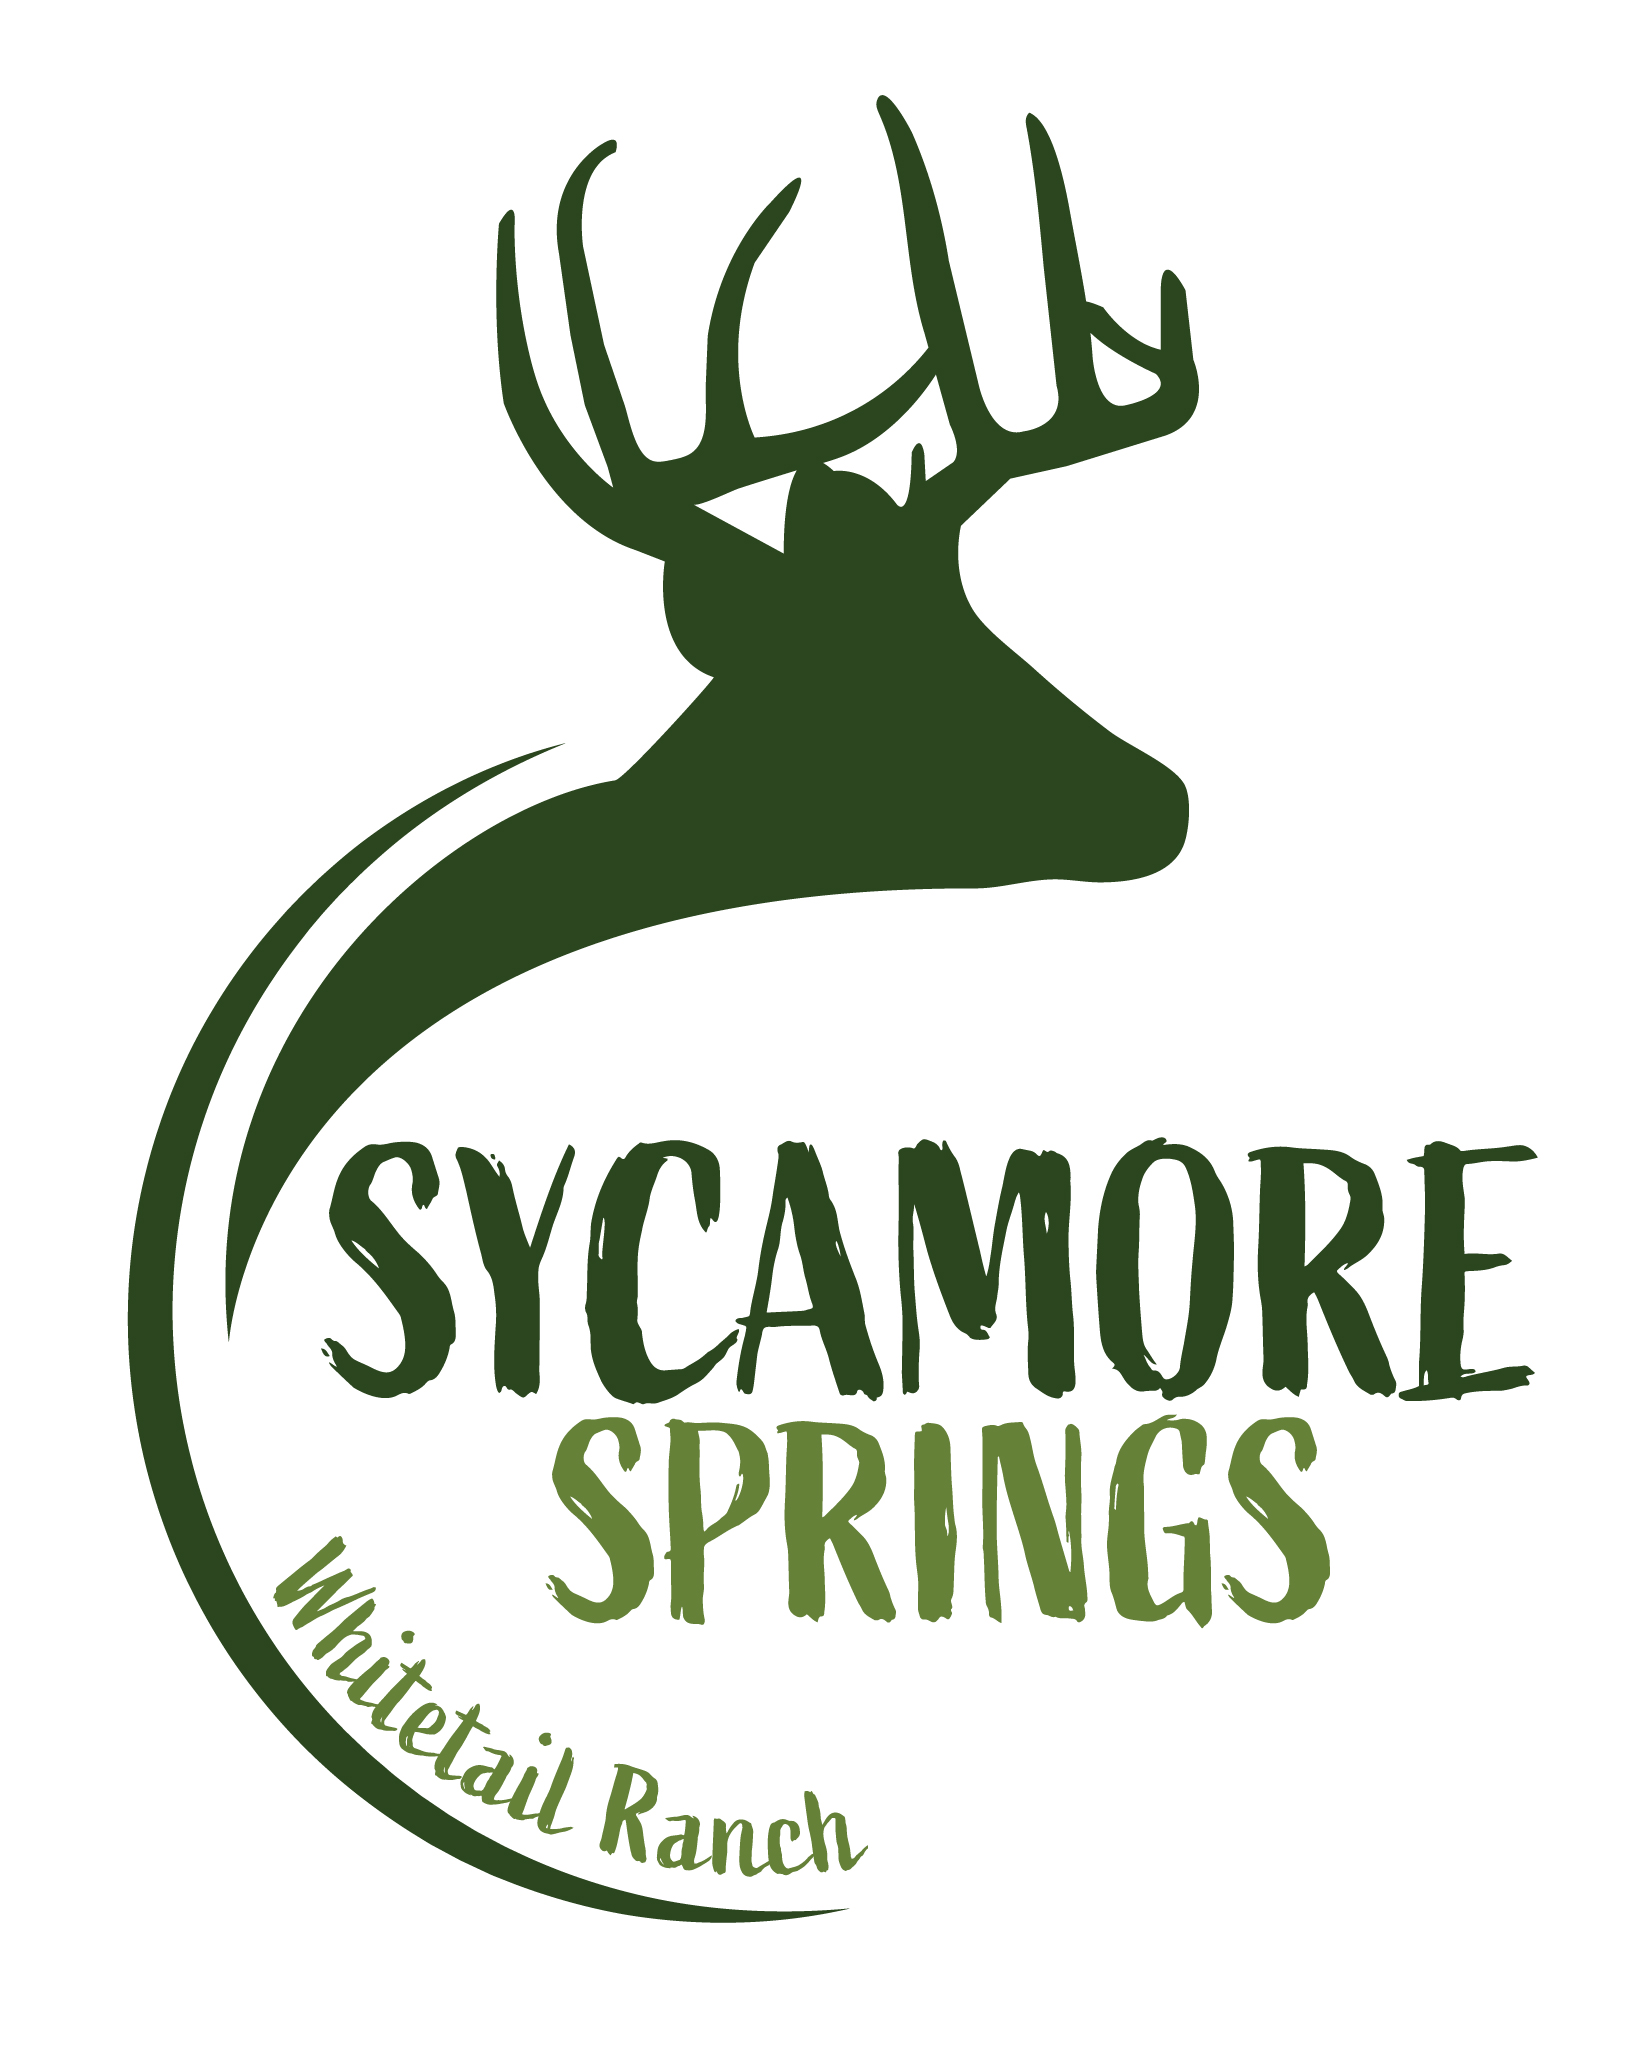 Sycamore Springs Whitetail Ranch